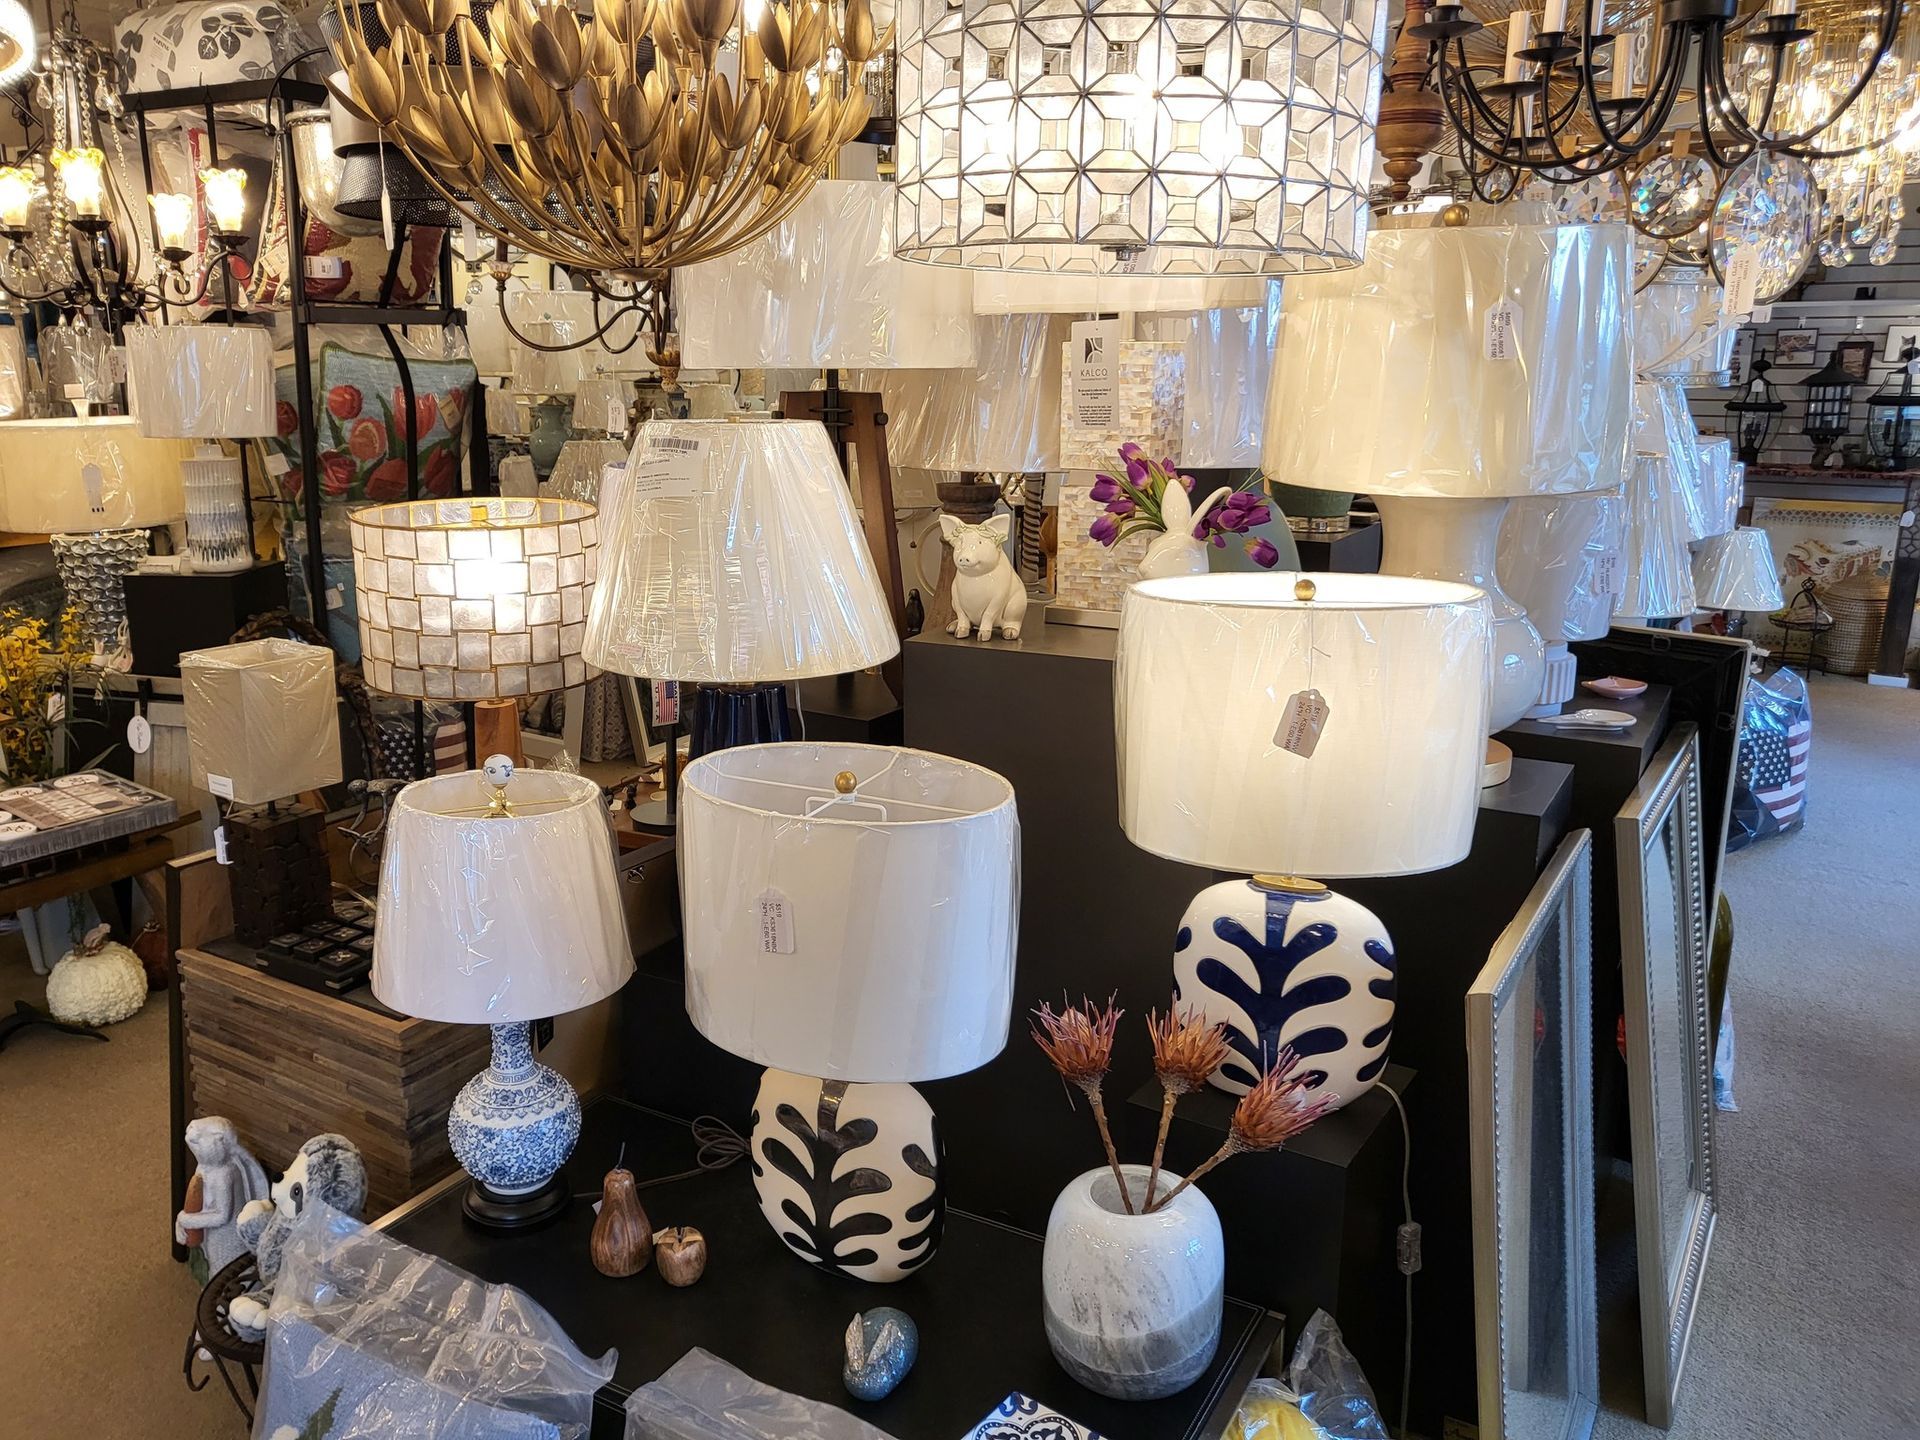 A store filled with lots of lamps and chandeliers.